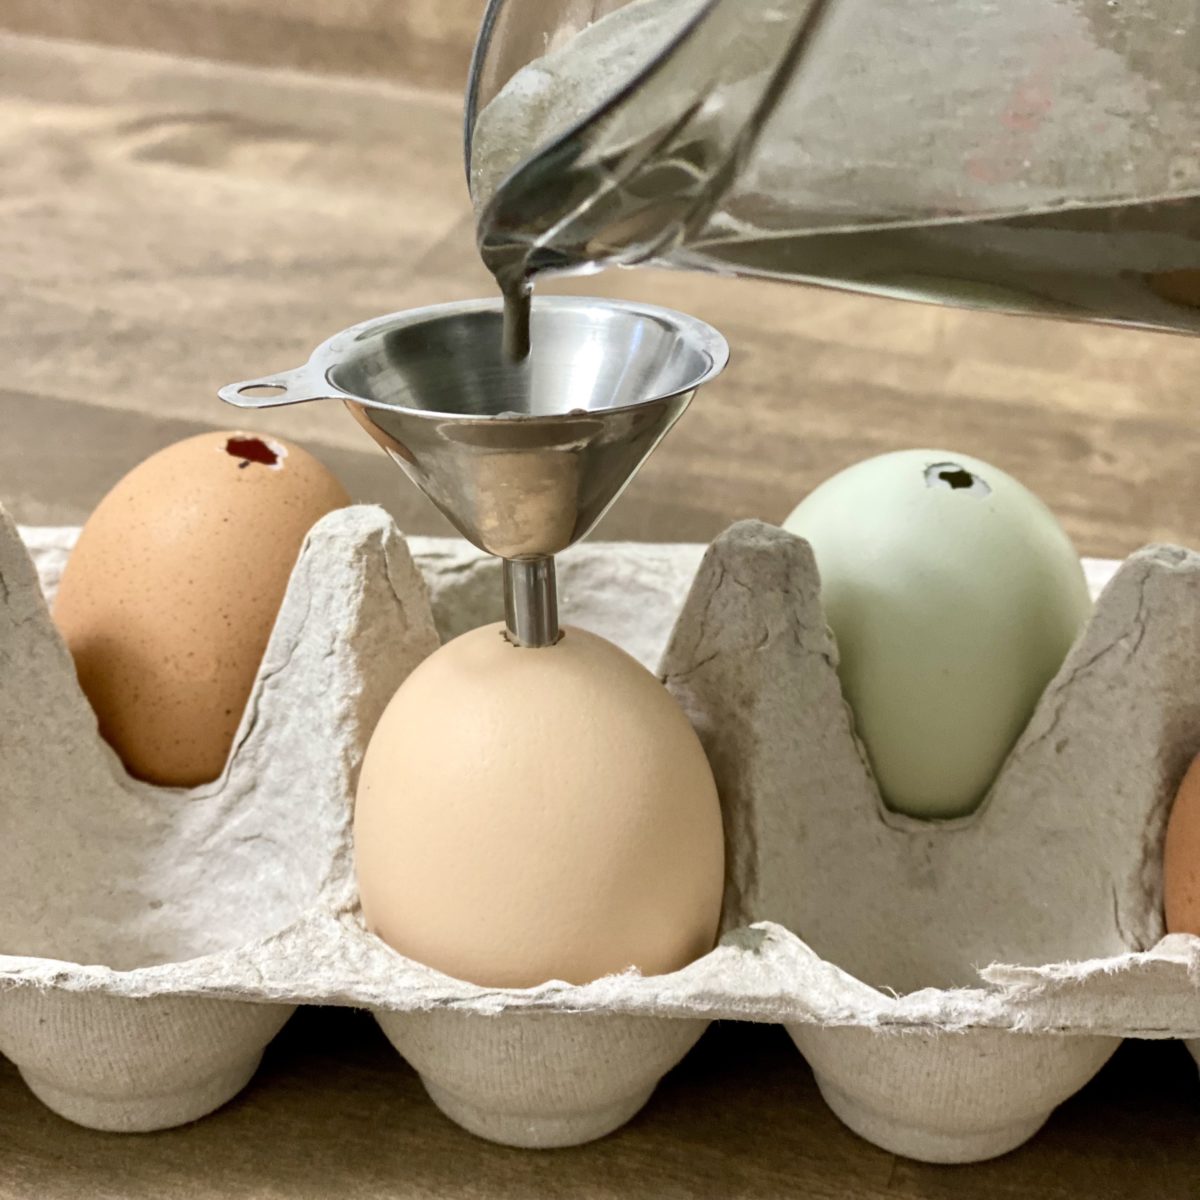 Concrete being poured into a funnel into an egg in a carton.